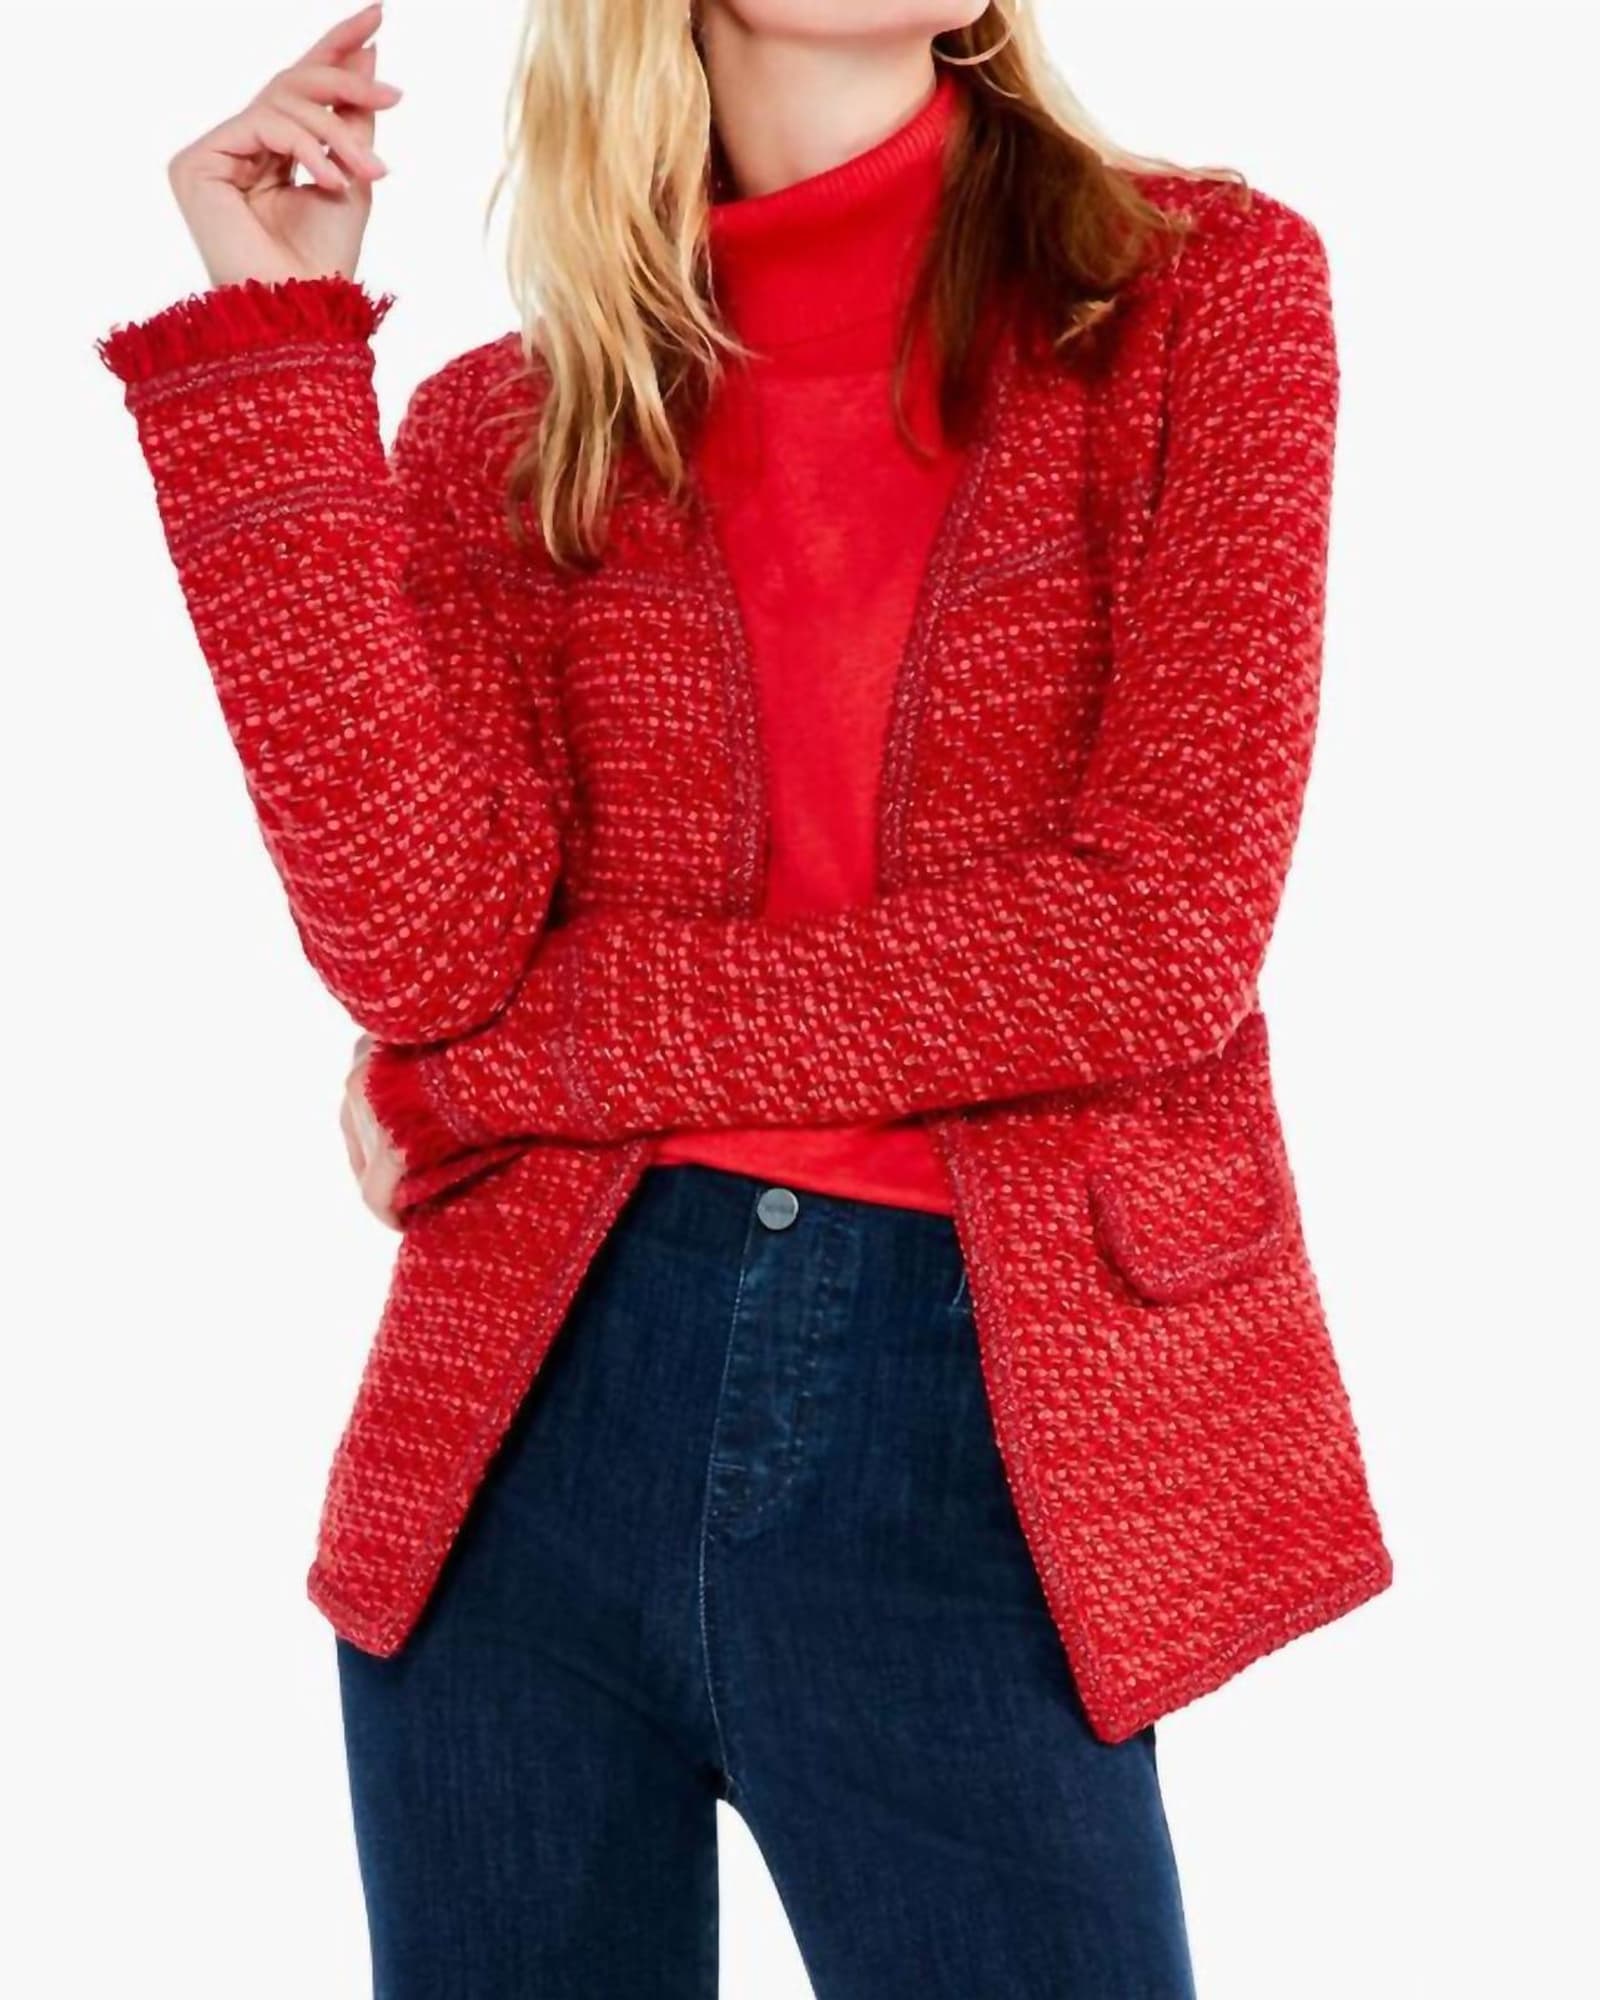 Up Tempo Jacket in Red Mix | Red Mix